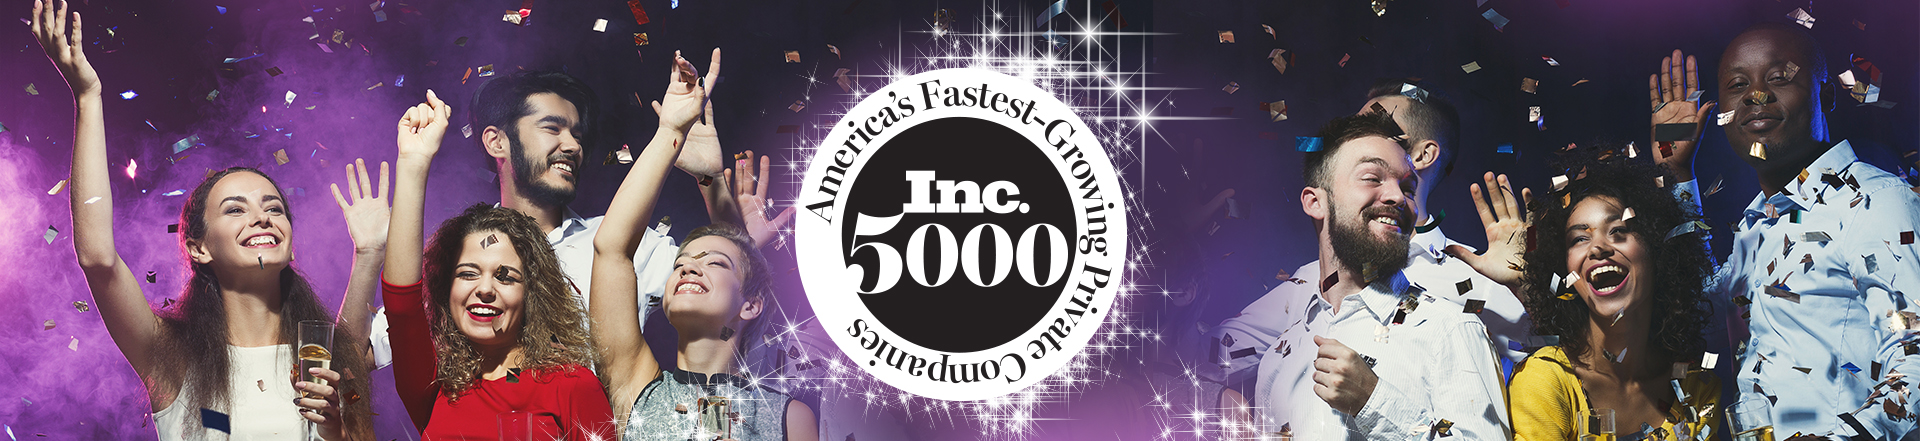 Homespire Mortgage Named to Inc. 5000’s List of America’s Fastest Growing Private Companies for Third Year in a Row